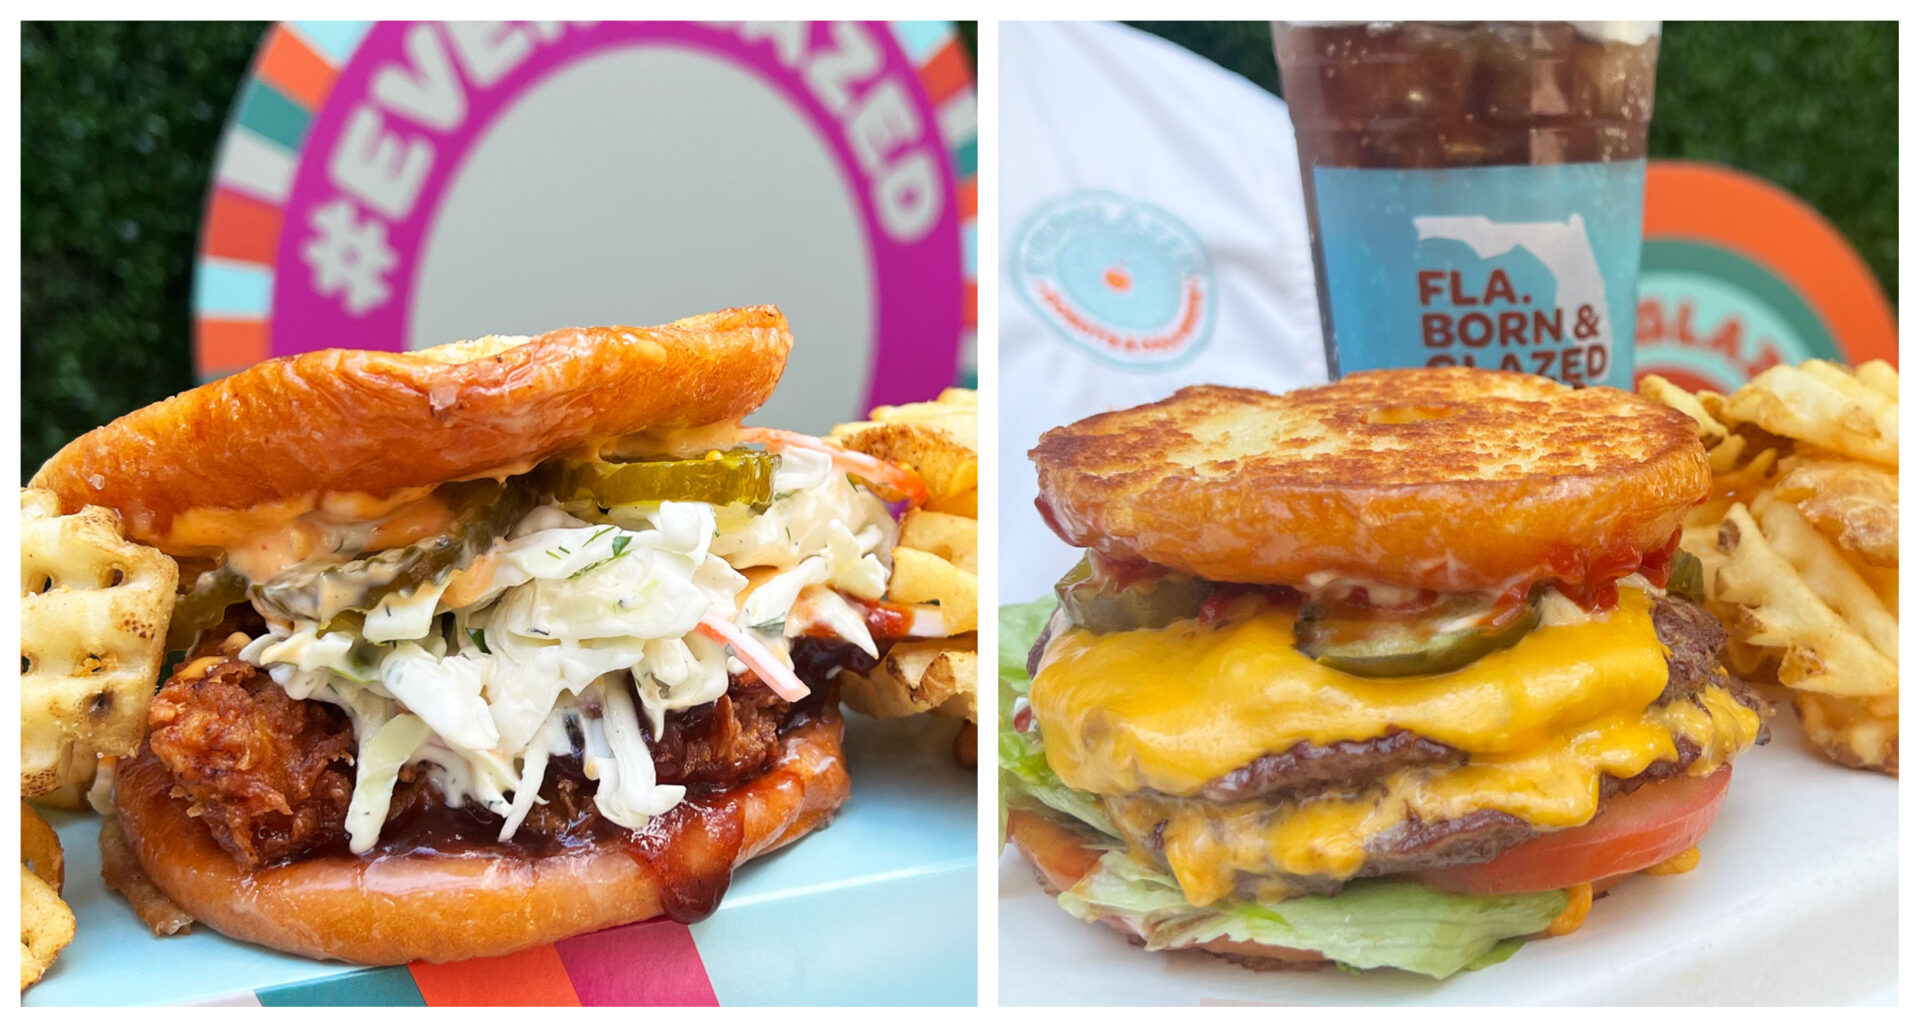 Hungry? Try the Chicken or Burger Combos from Everglazed Donuts in Disney Springs